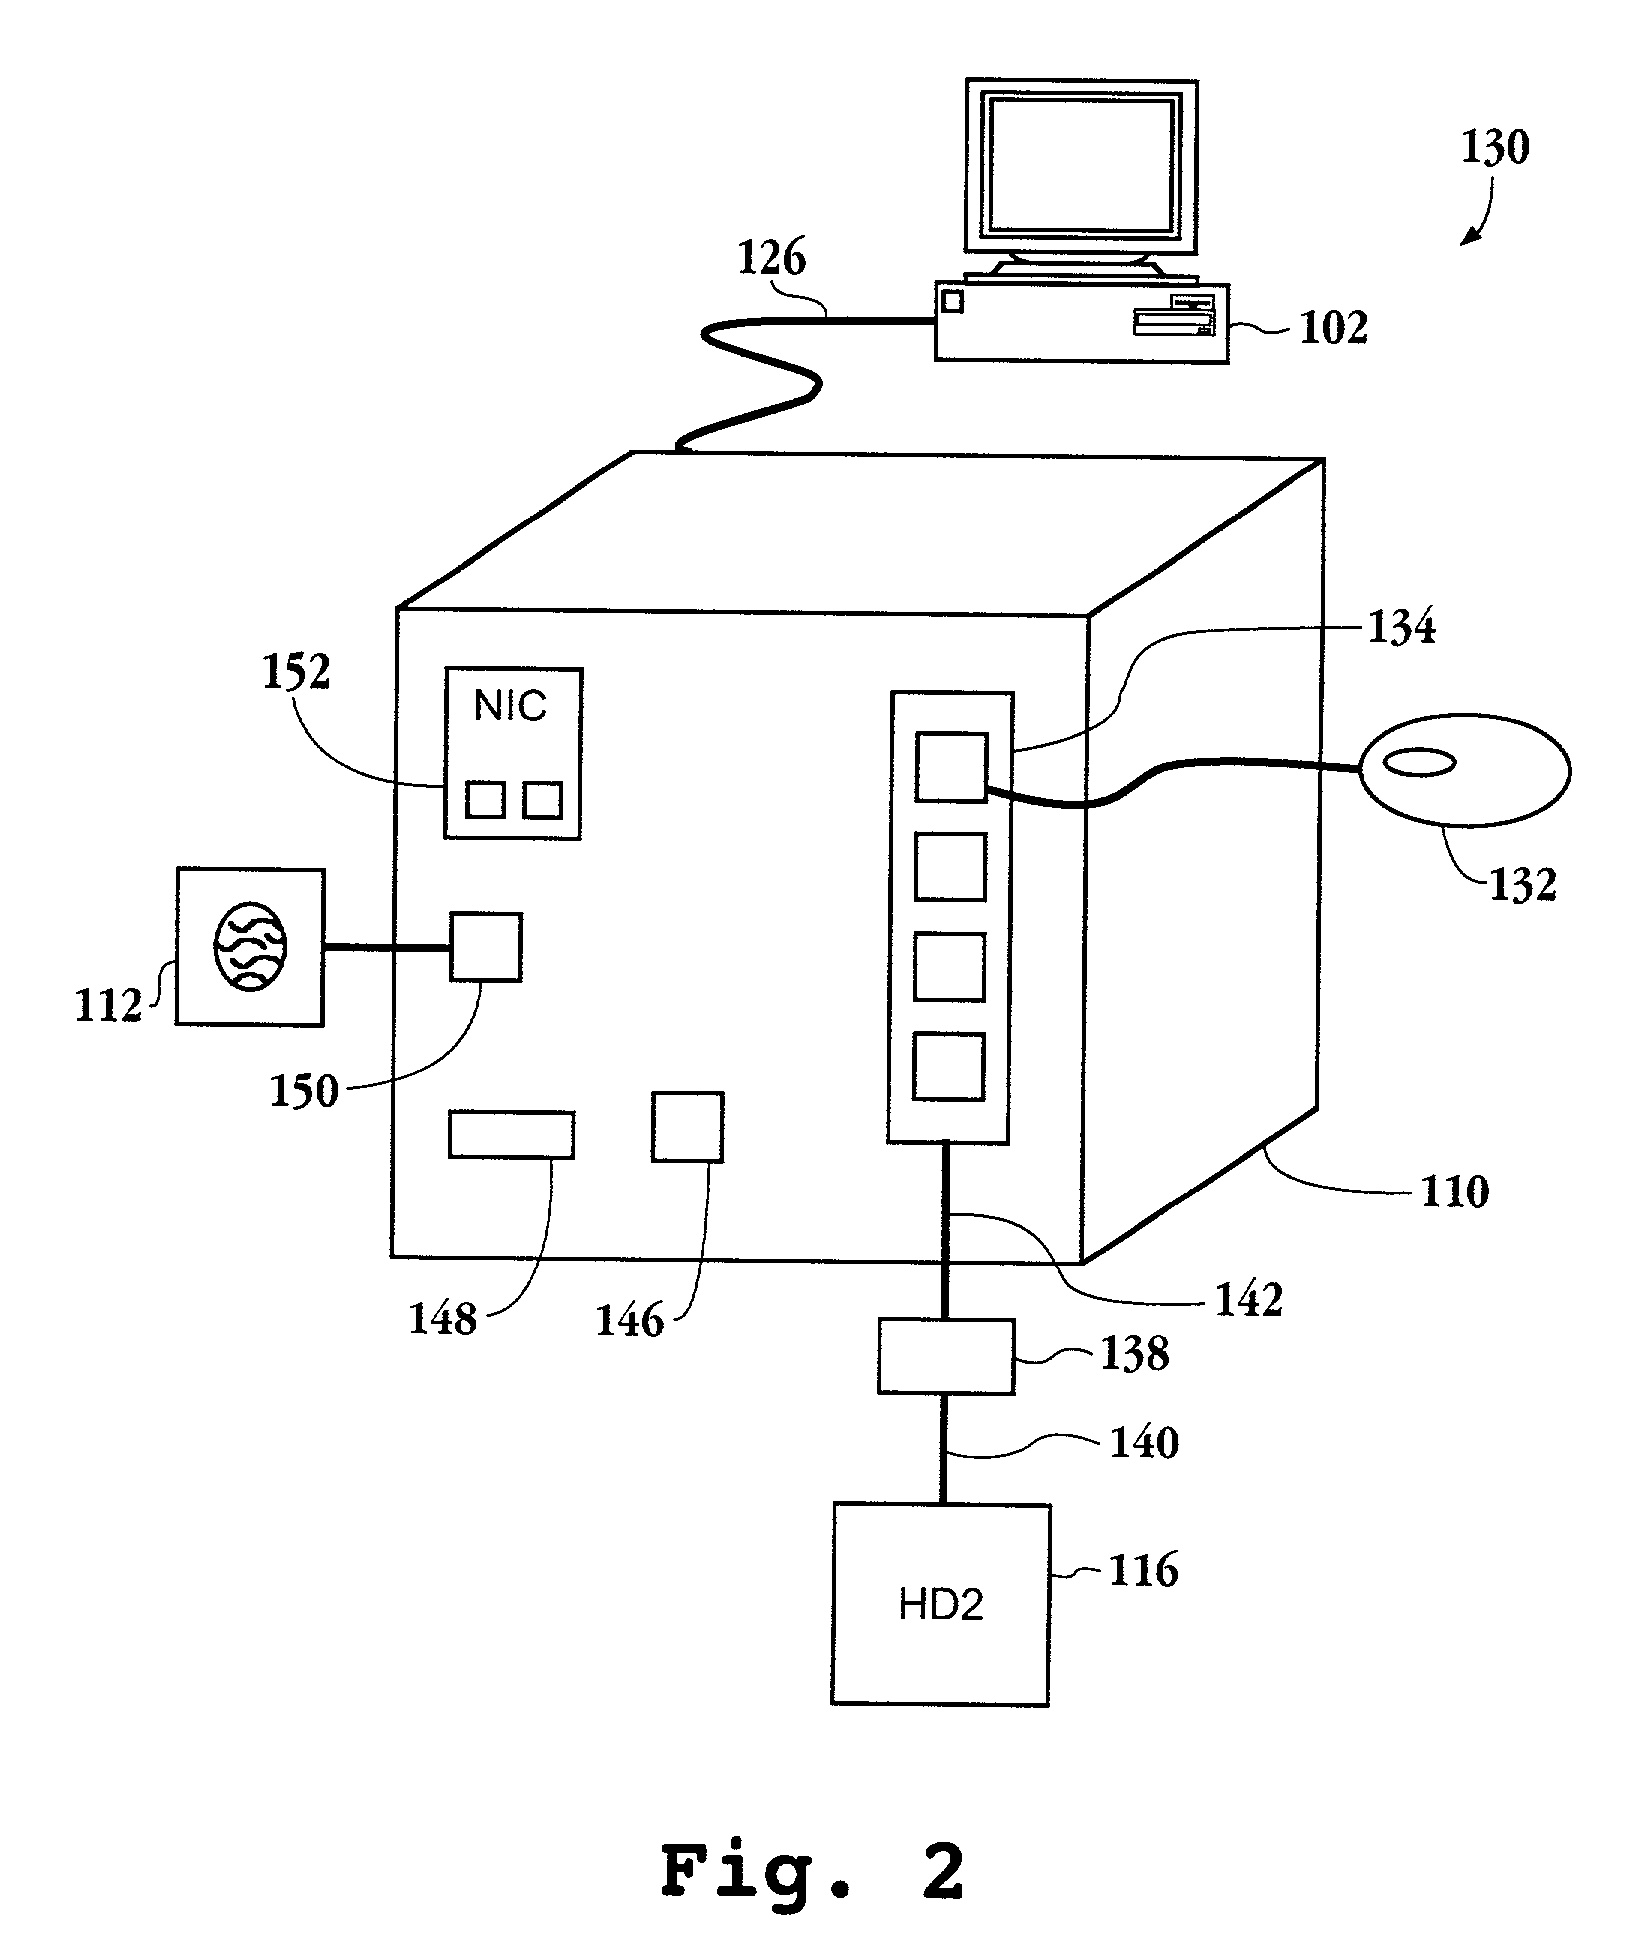 Method and apparatus for a secure computing environment